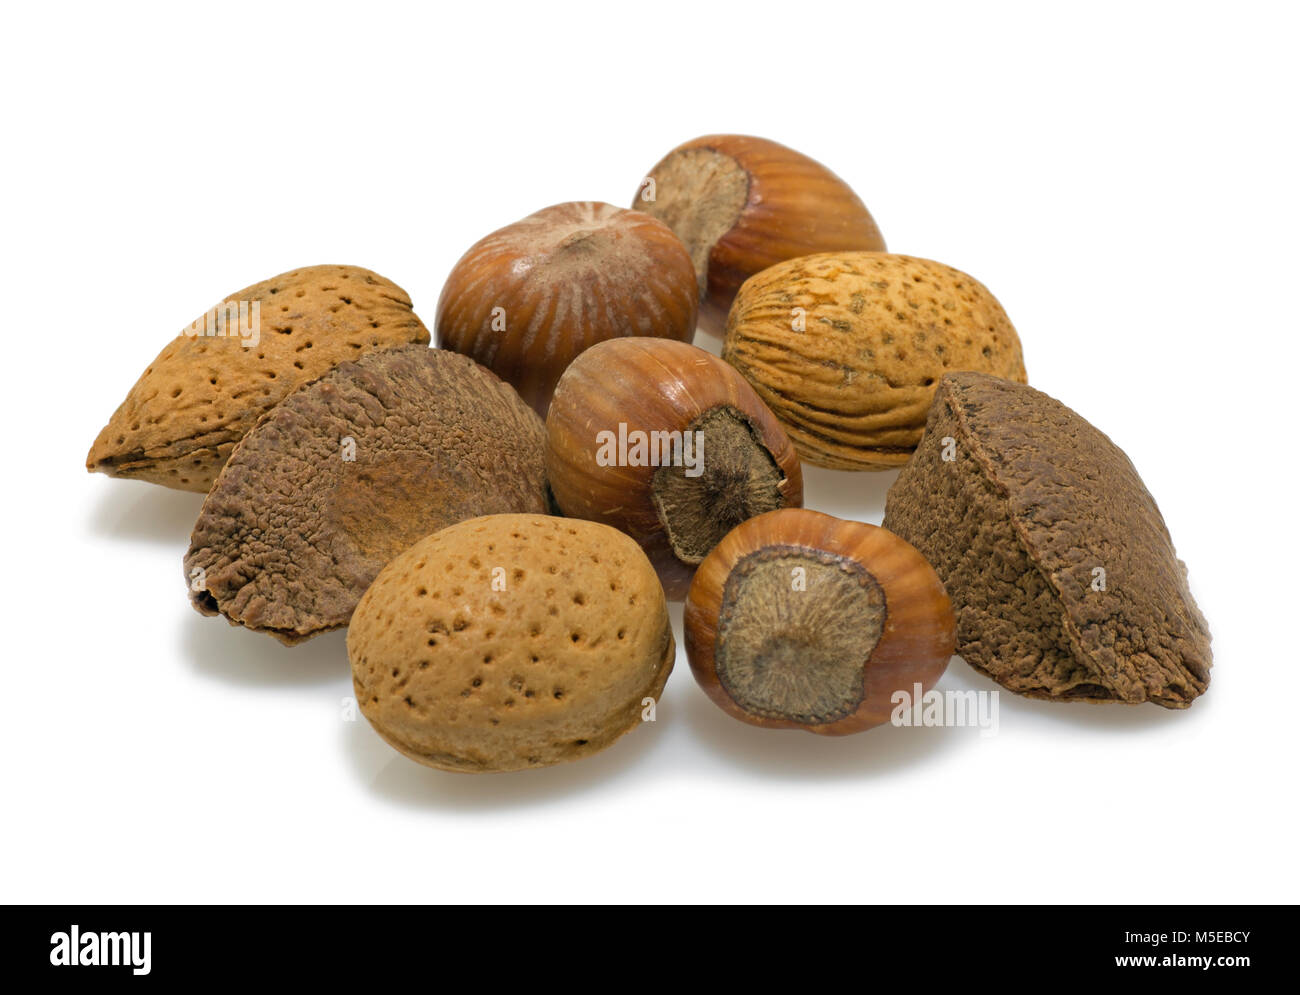 a close-up selection of mixed nuts, hazelnuts, almonds and brazil nuts Stock Photo